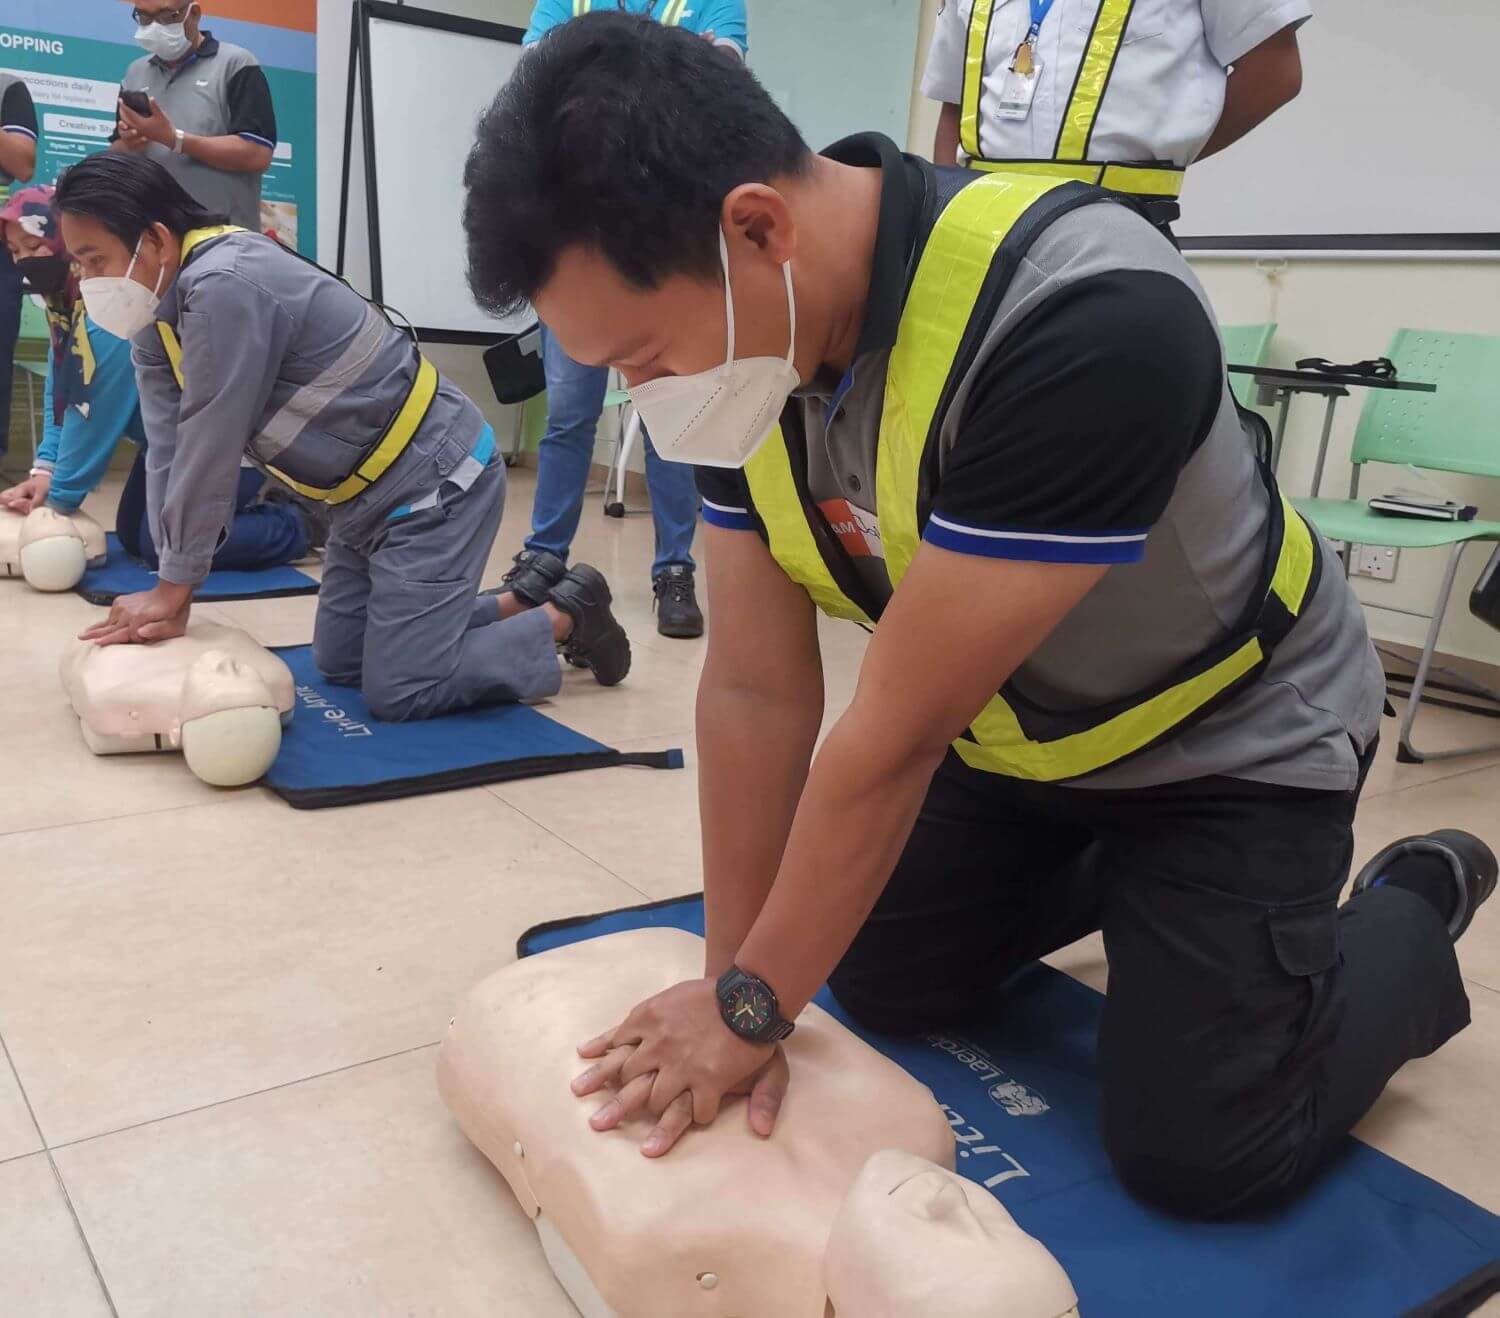 Occupational First Aid CPR training with ASEC